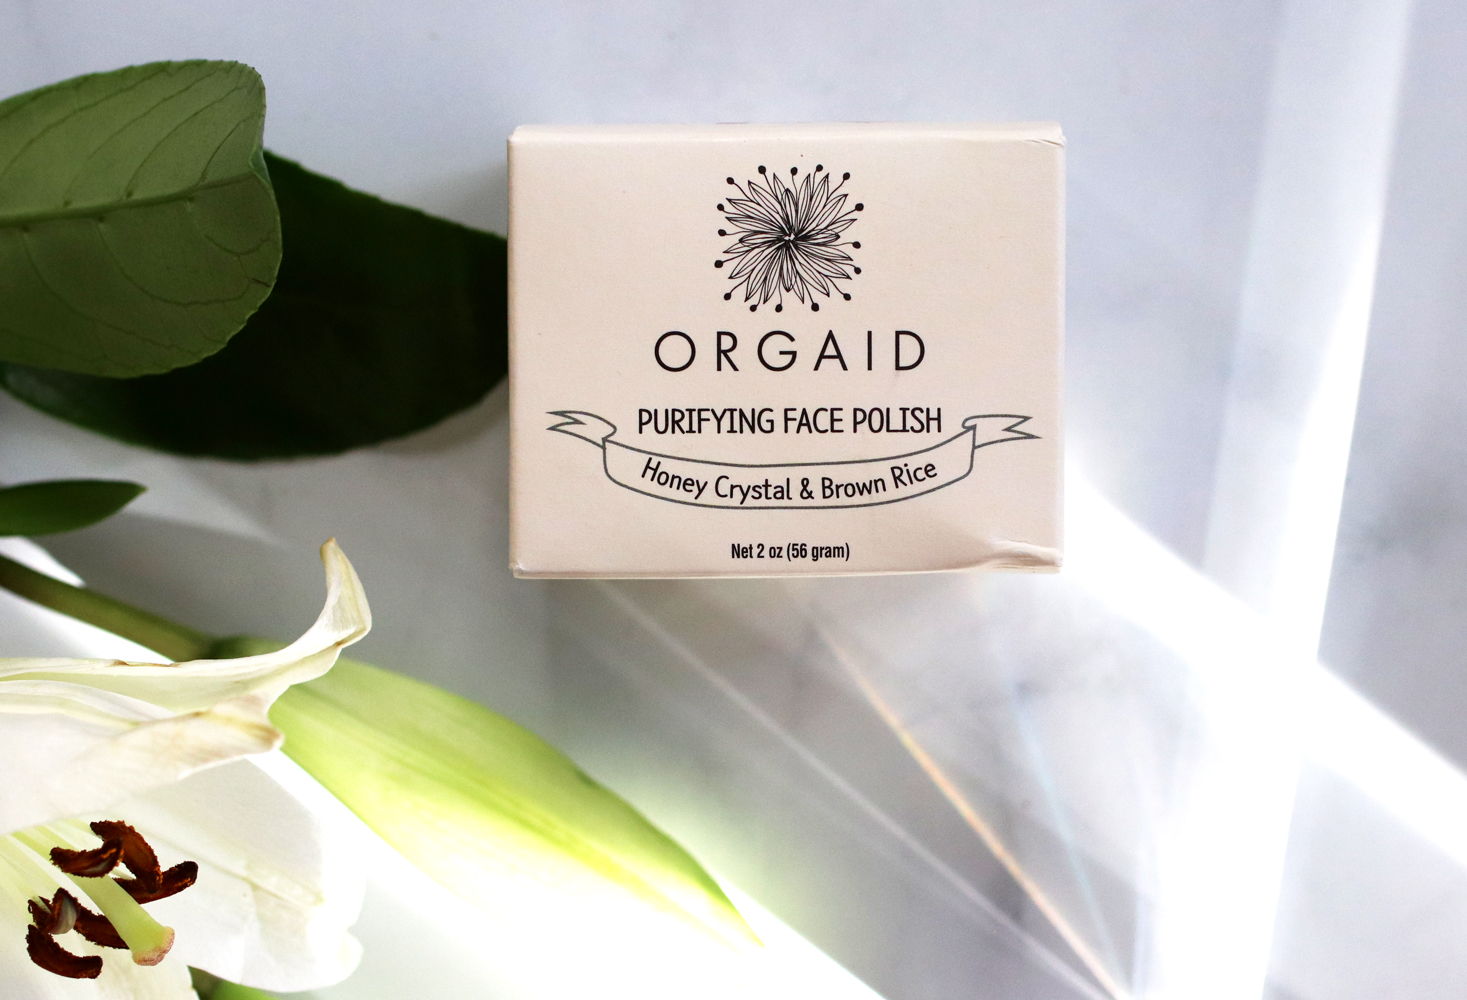 Clean beauty from Cynaglow - ORGAID Purifying Face Polish 